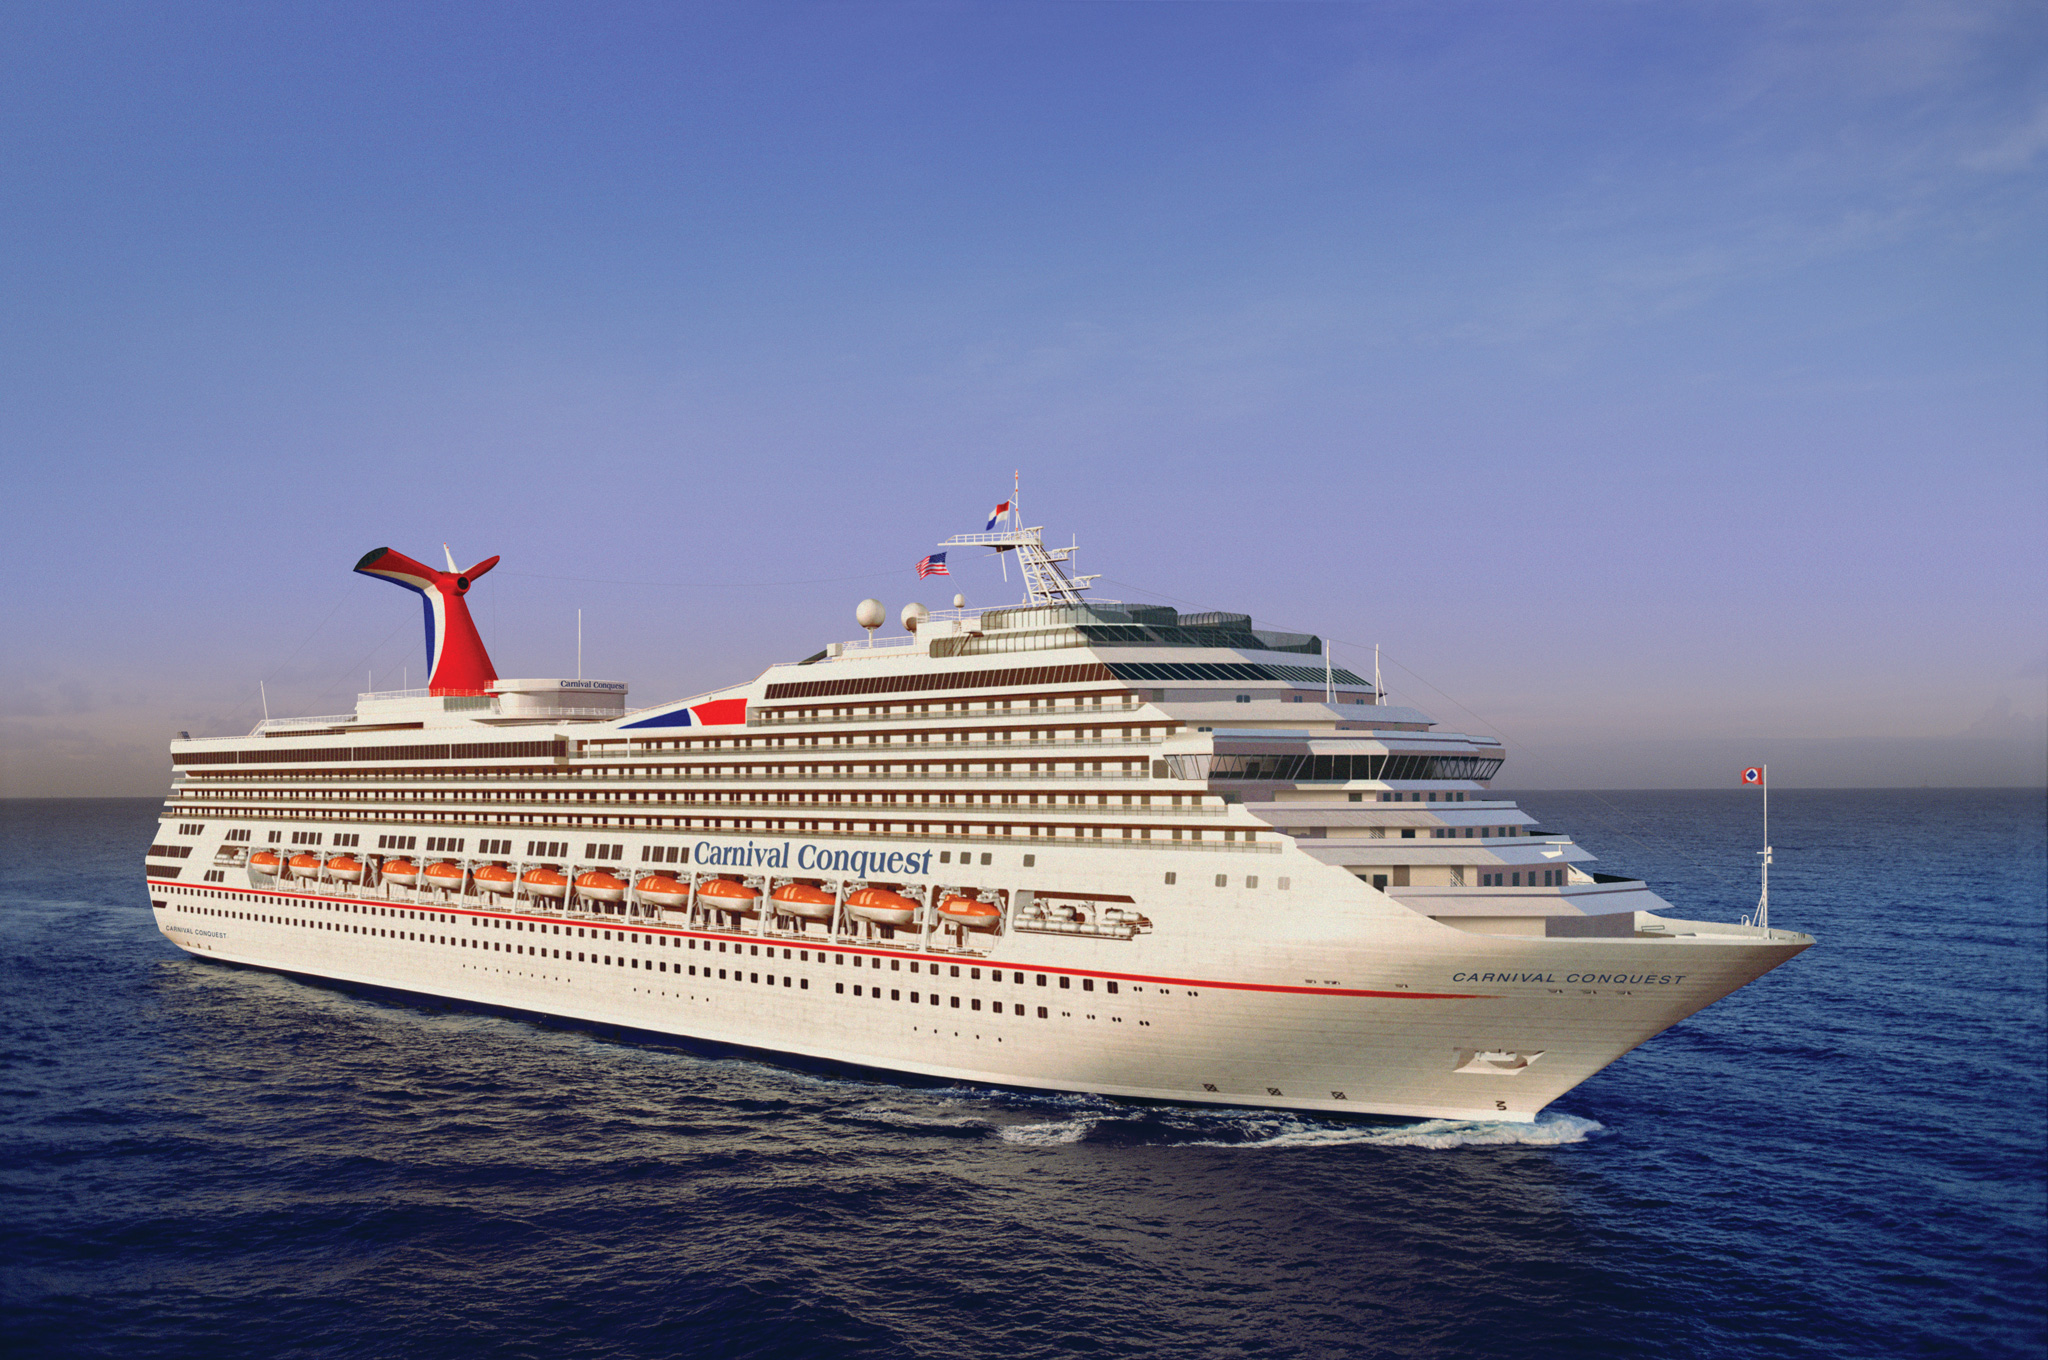 Best of Pictures of carnival conquest